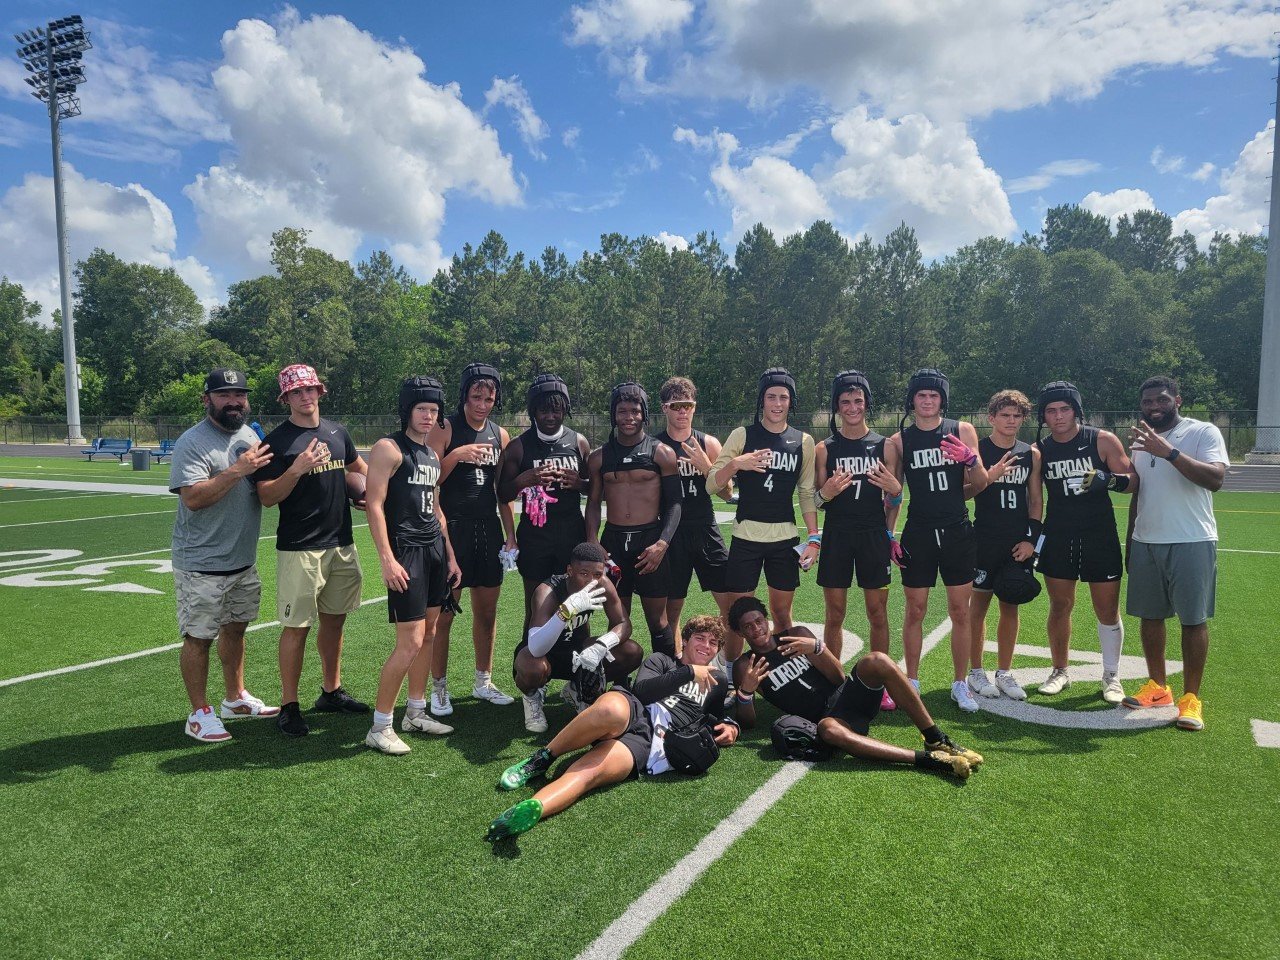 Jordan qualified for the state 7-on-7 tournament over the weekend